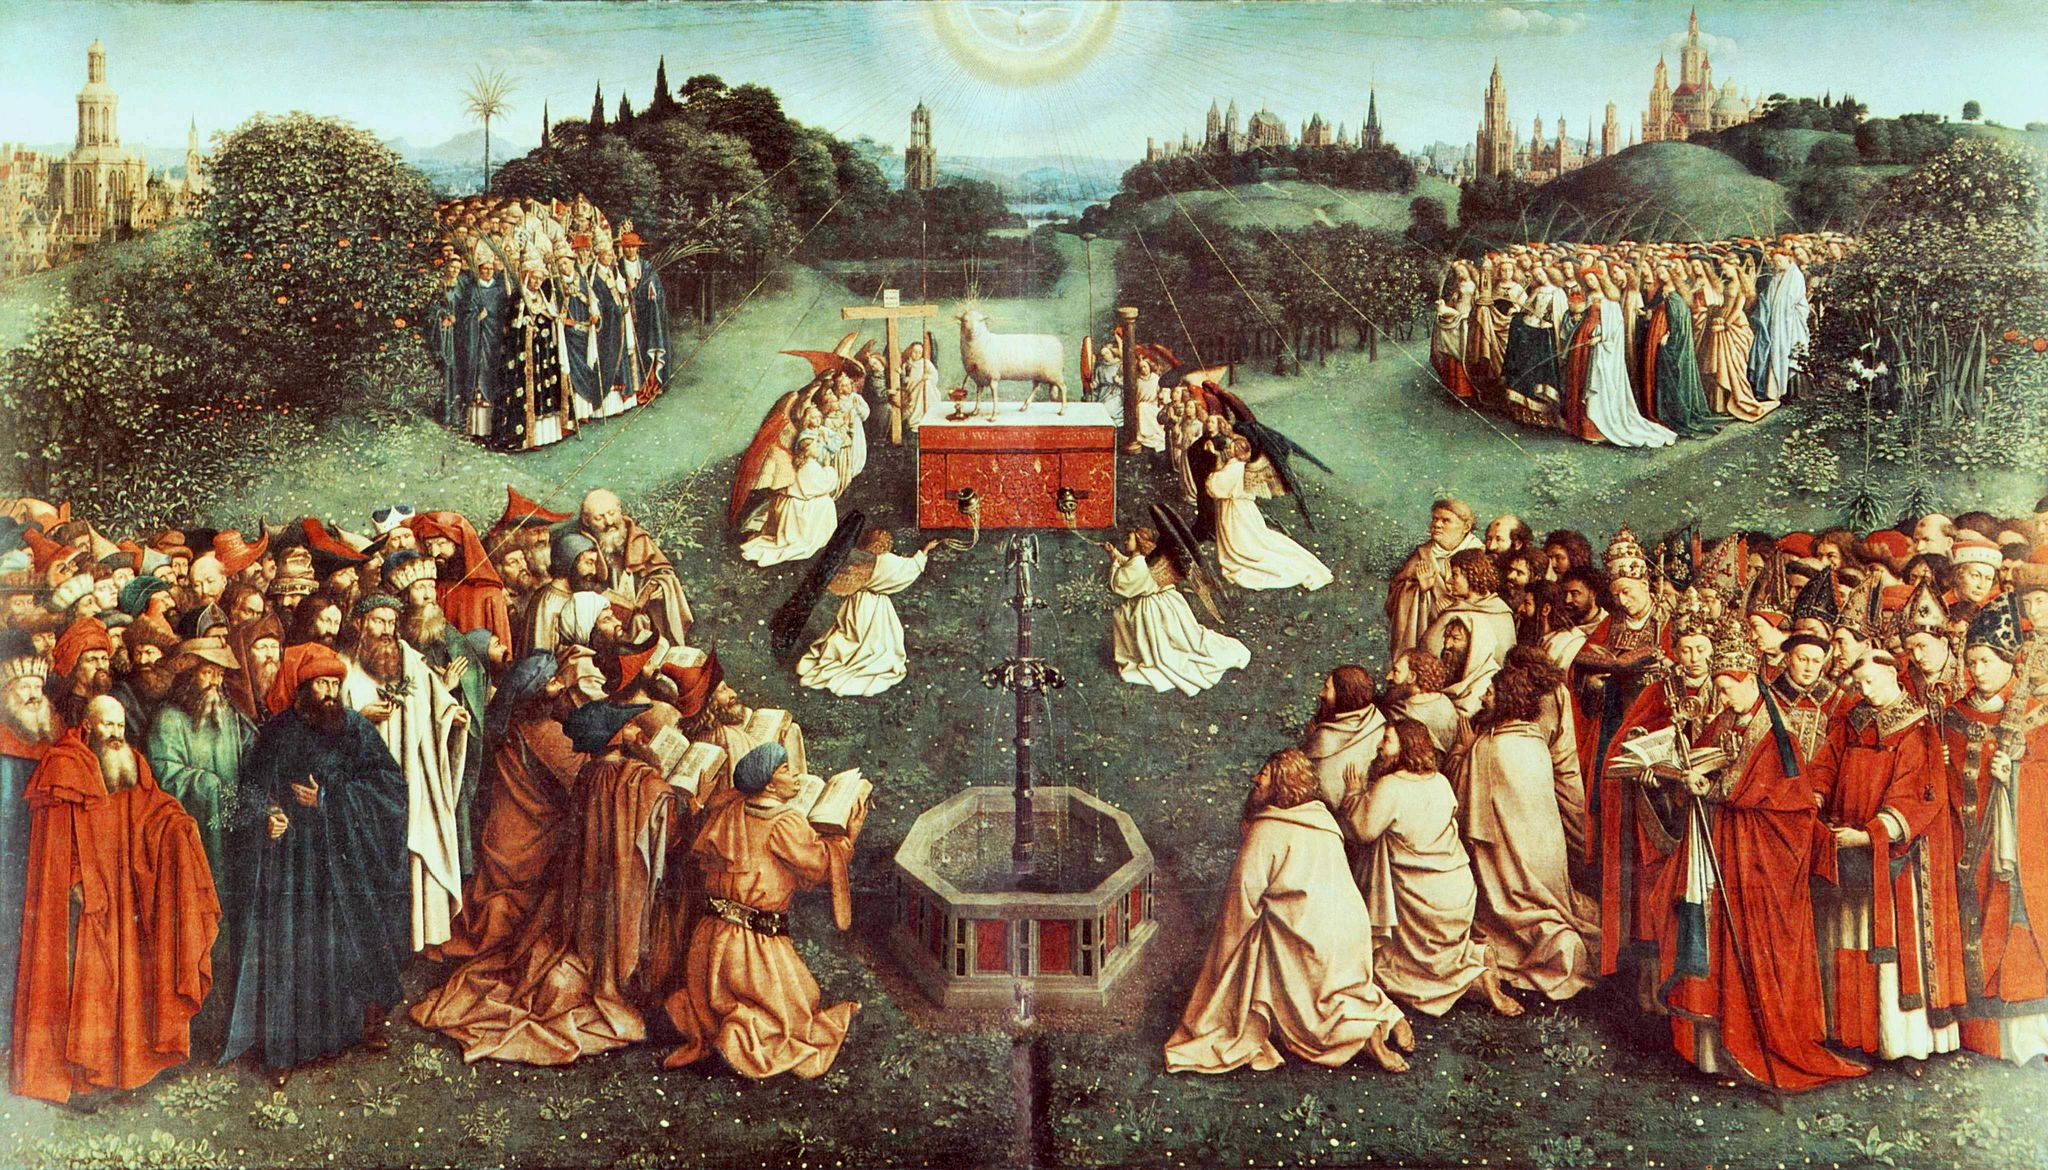 The famous painting Die Anbetung des mystischen Lammes (Adoration of the Lamb of God) by Hubert van Eyck is a stirring representation of the glory of Messiah according to Christian tradition, but does not accurately depict His position as King and High Priest of Israel.